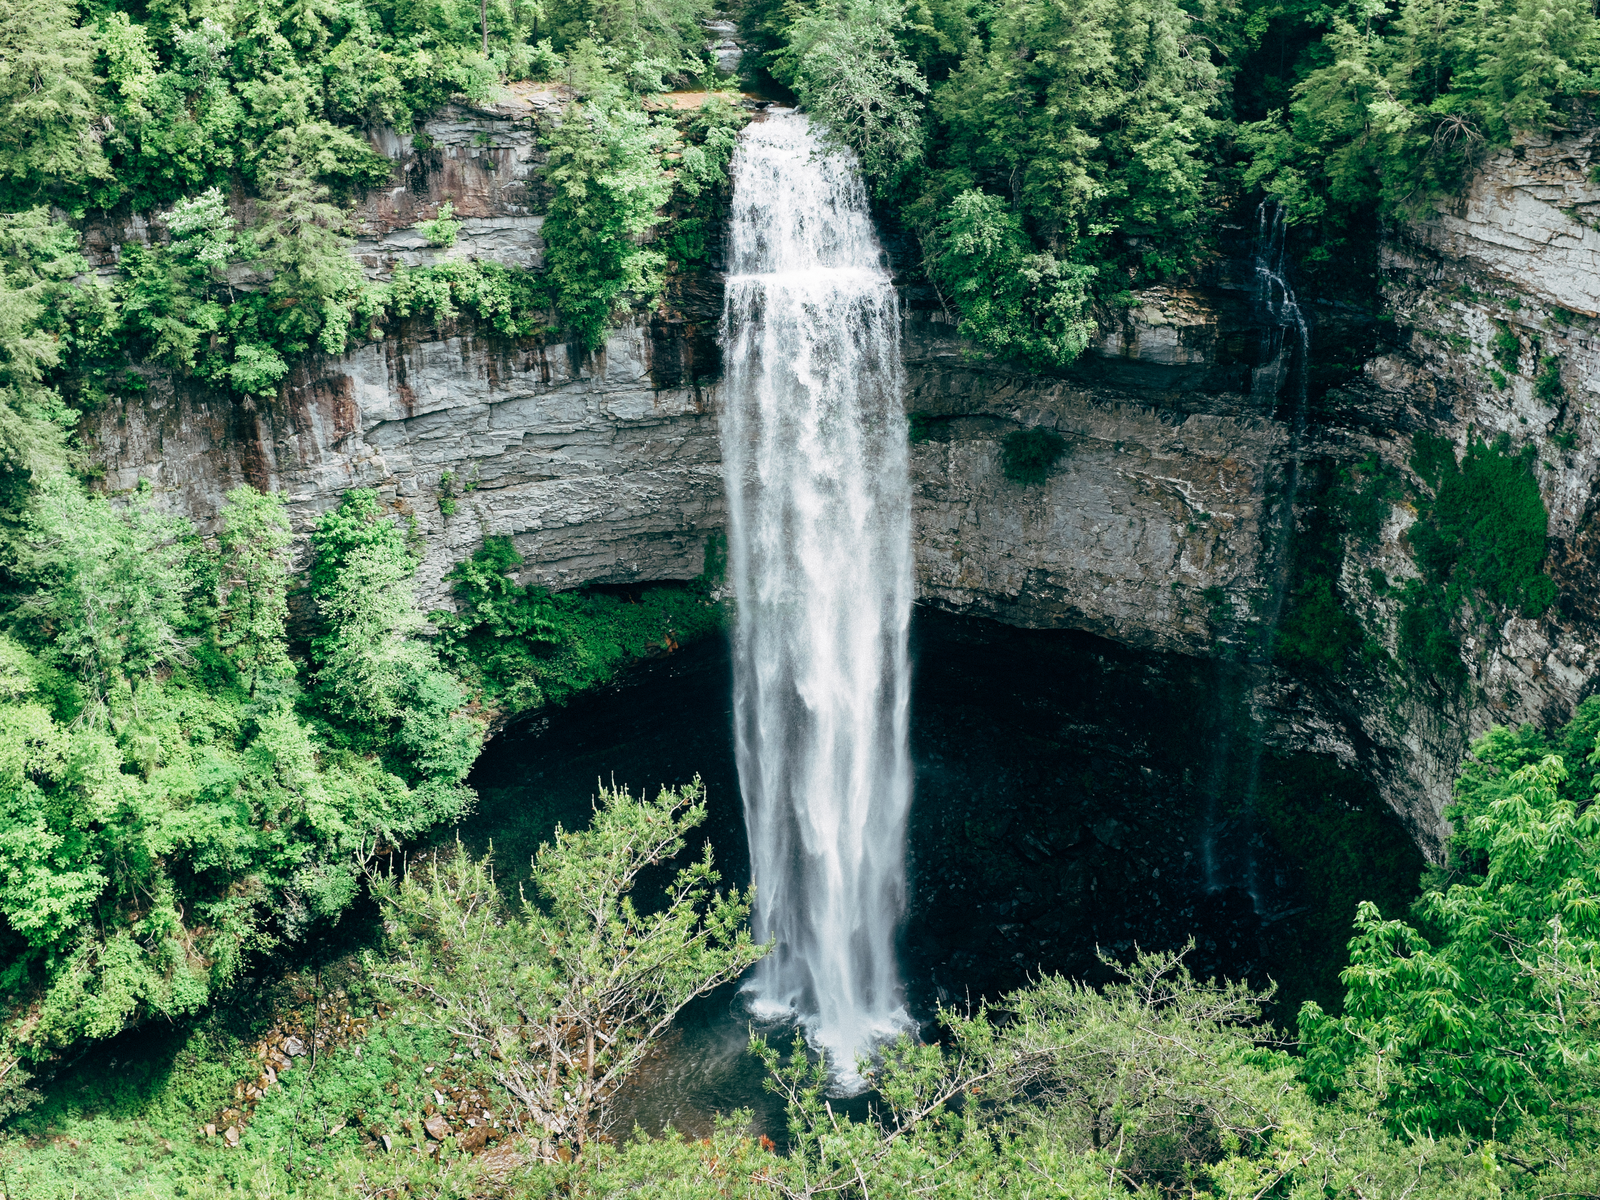 Overhead view of the mesmerizing Fall Creek Falls Waterfall, one of the most visited state park and one of the best places to visit in Tennessee